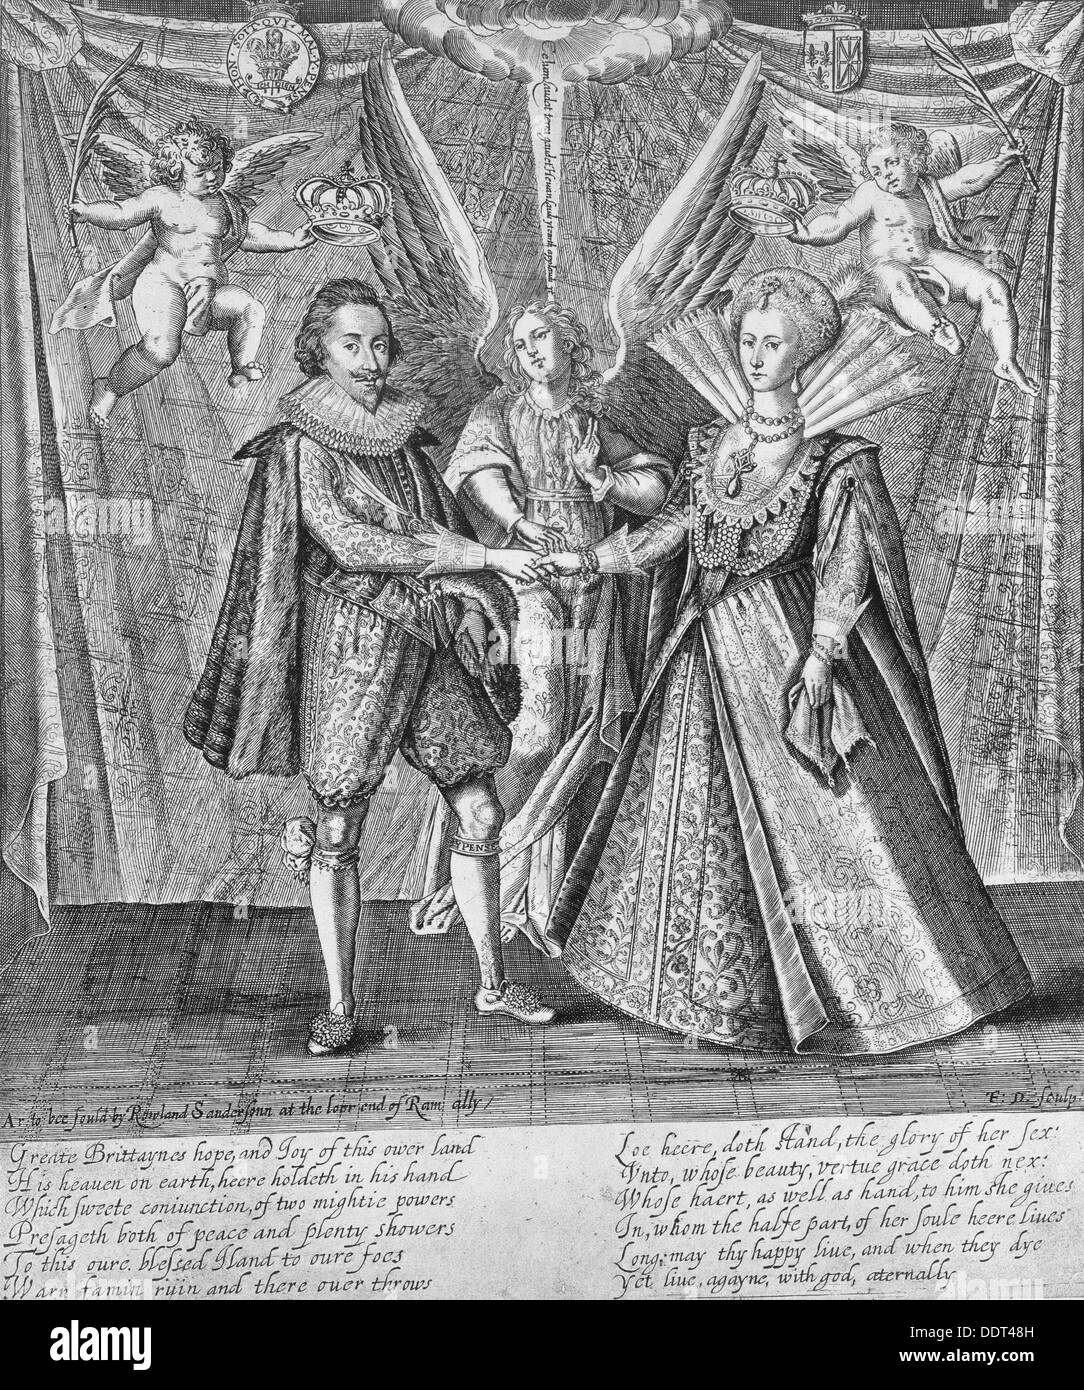 Celebration of the Marriage of James VI of Scotland and Anne of Denmark, 1589 (c1610-1625). Artist: Francis Delaram Stock Photo